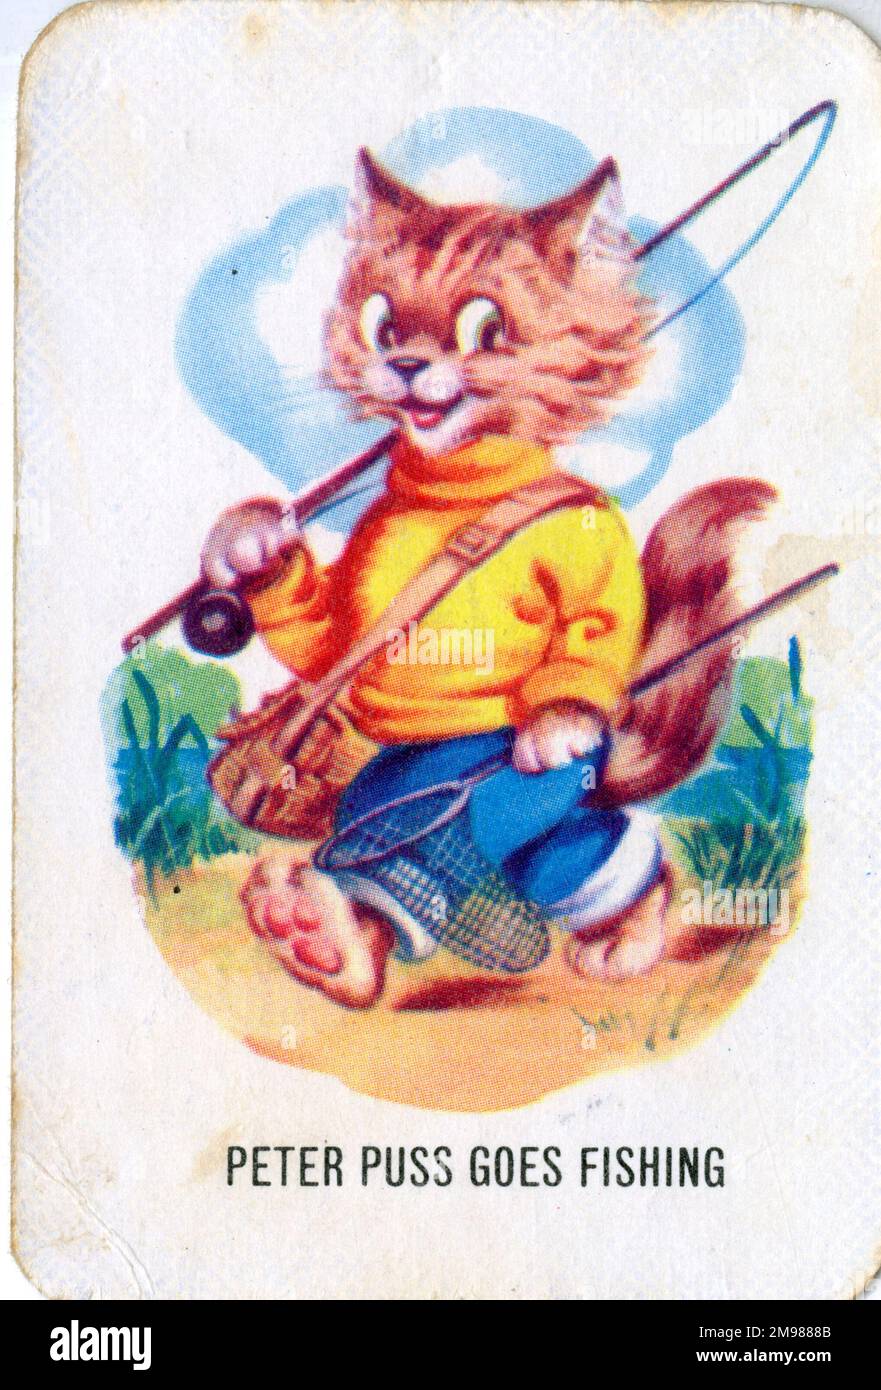 Old Maid card game - Peter Puss goes Fishing. Stock Photo